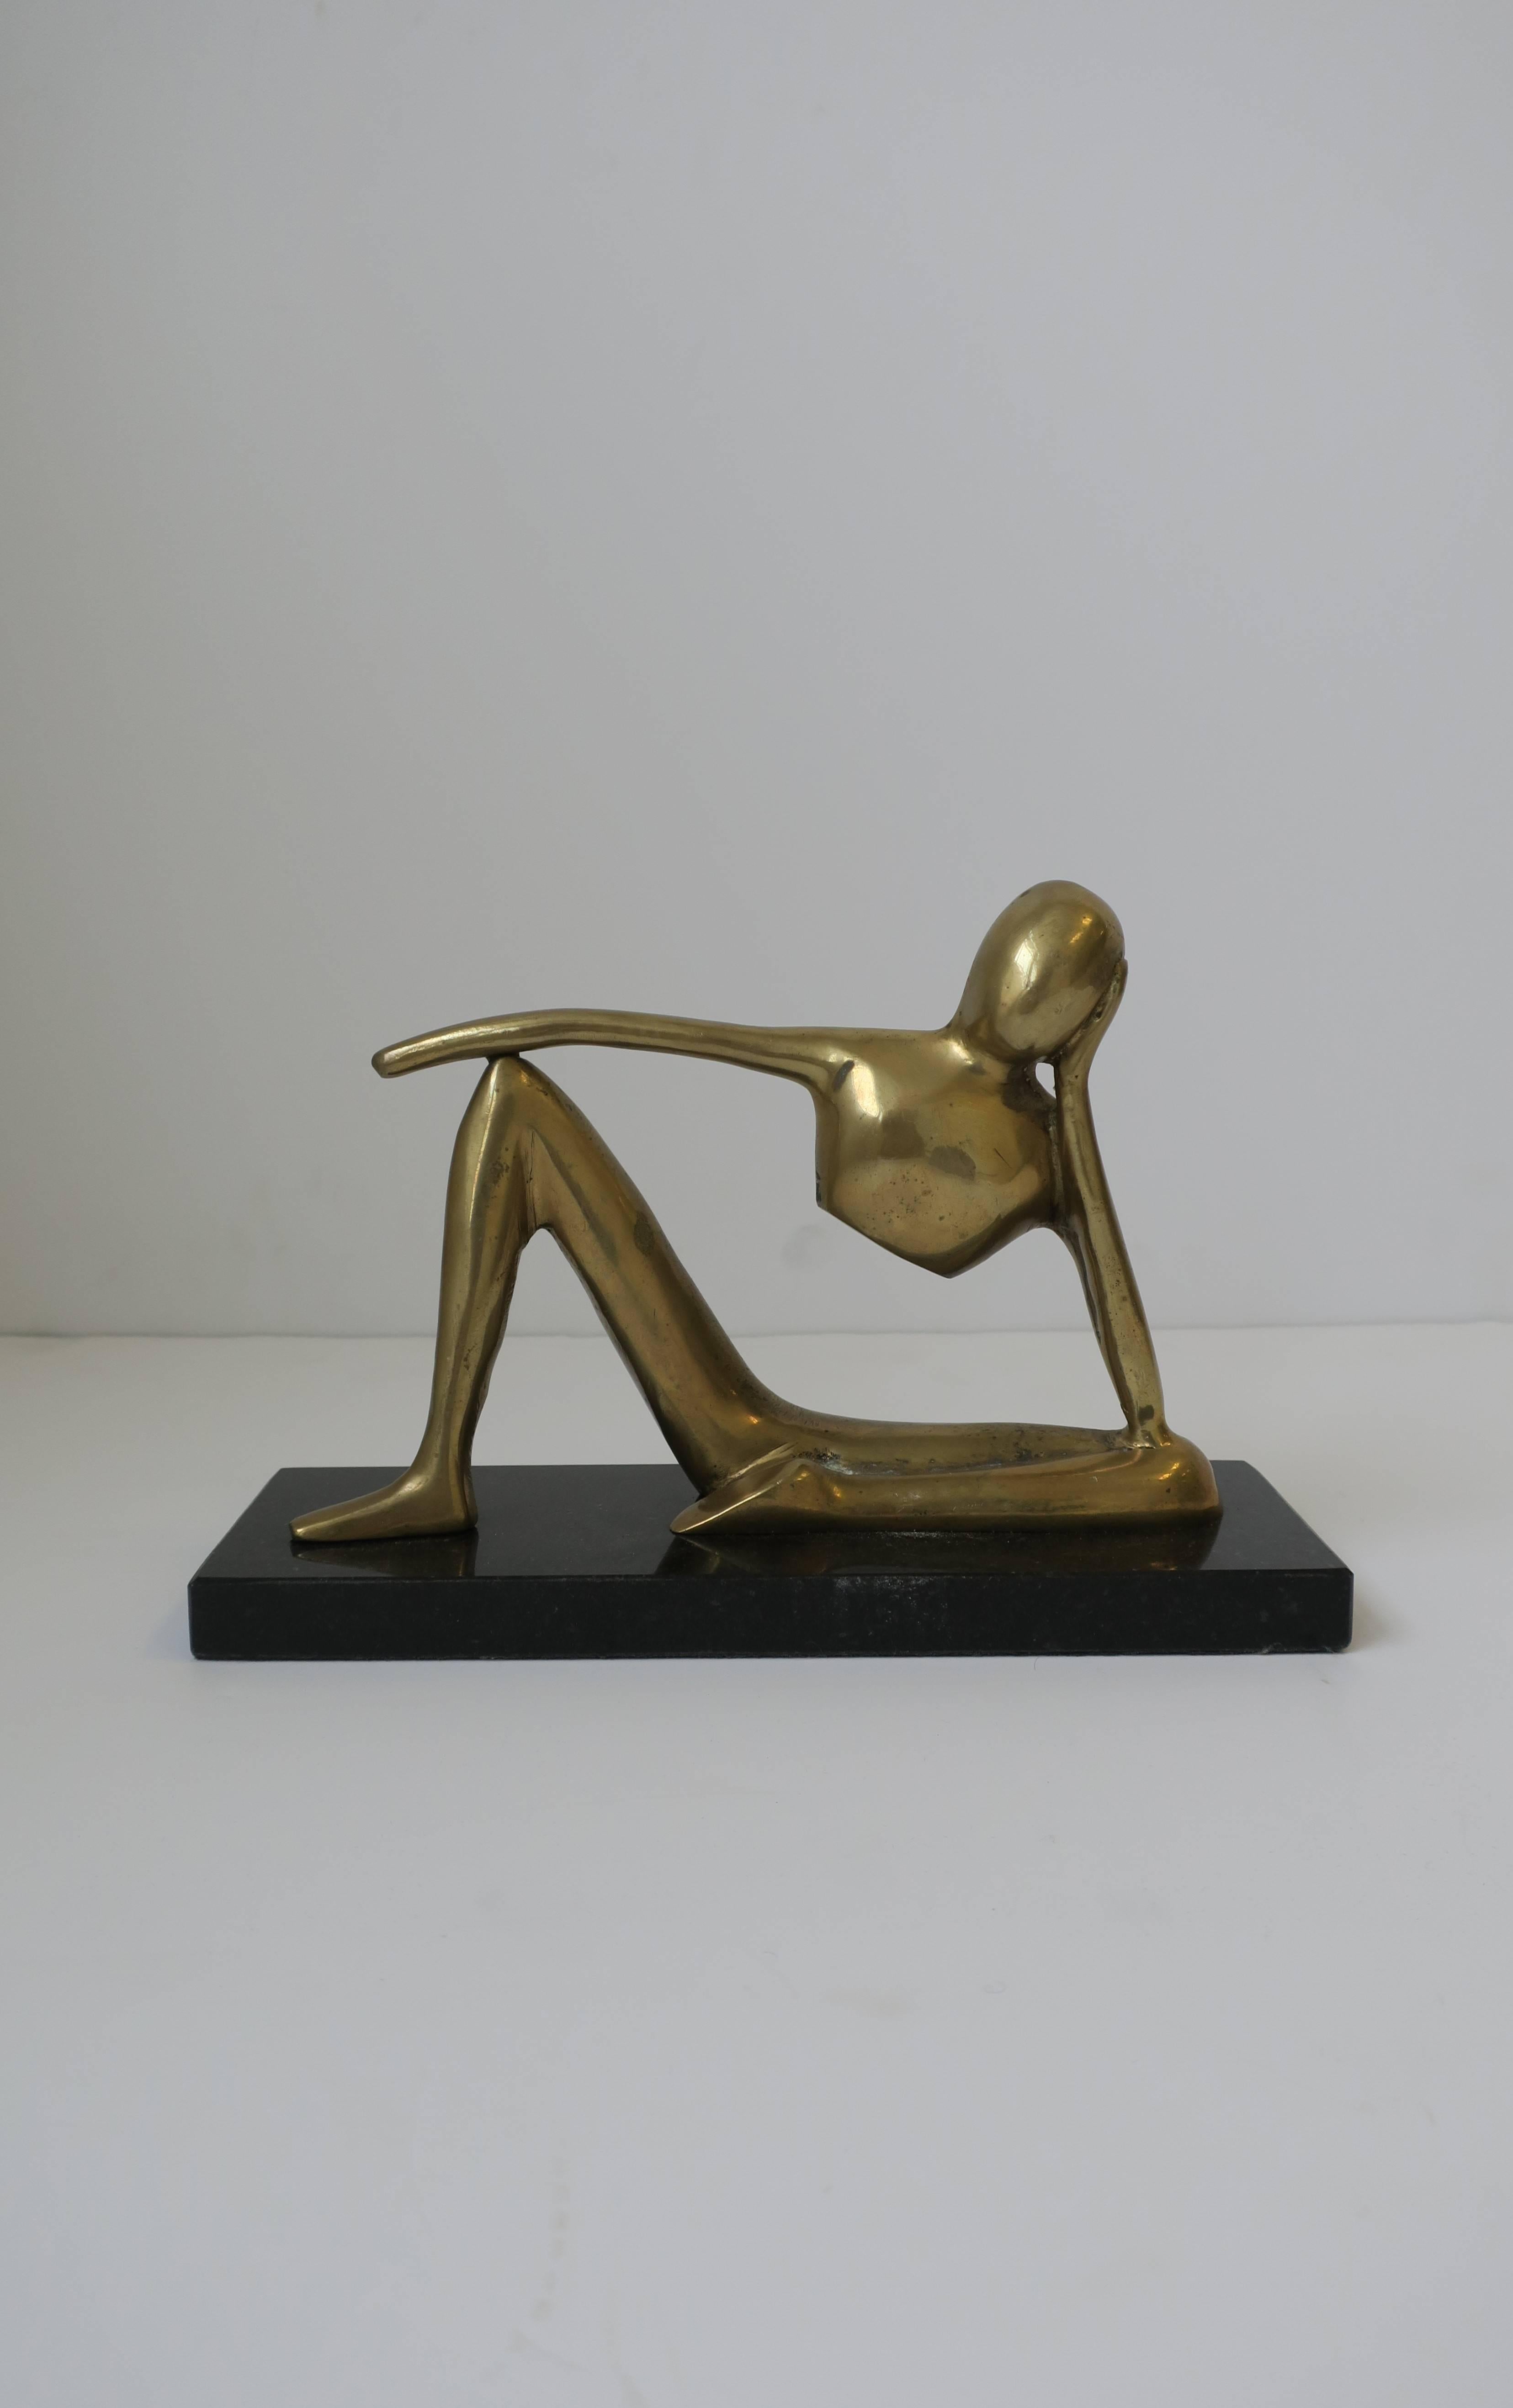 A substantial solid brass figural sculpture on black marble base, in the style of Sculptor Jean Hans Arp (1886 - 1966.) Sculpture on base measures 6 inches H x 9 inches W x 3 D. Item available here online. By request, item can be made available by